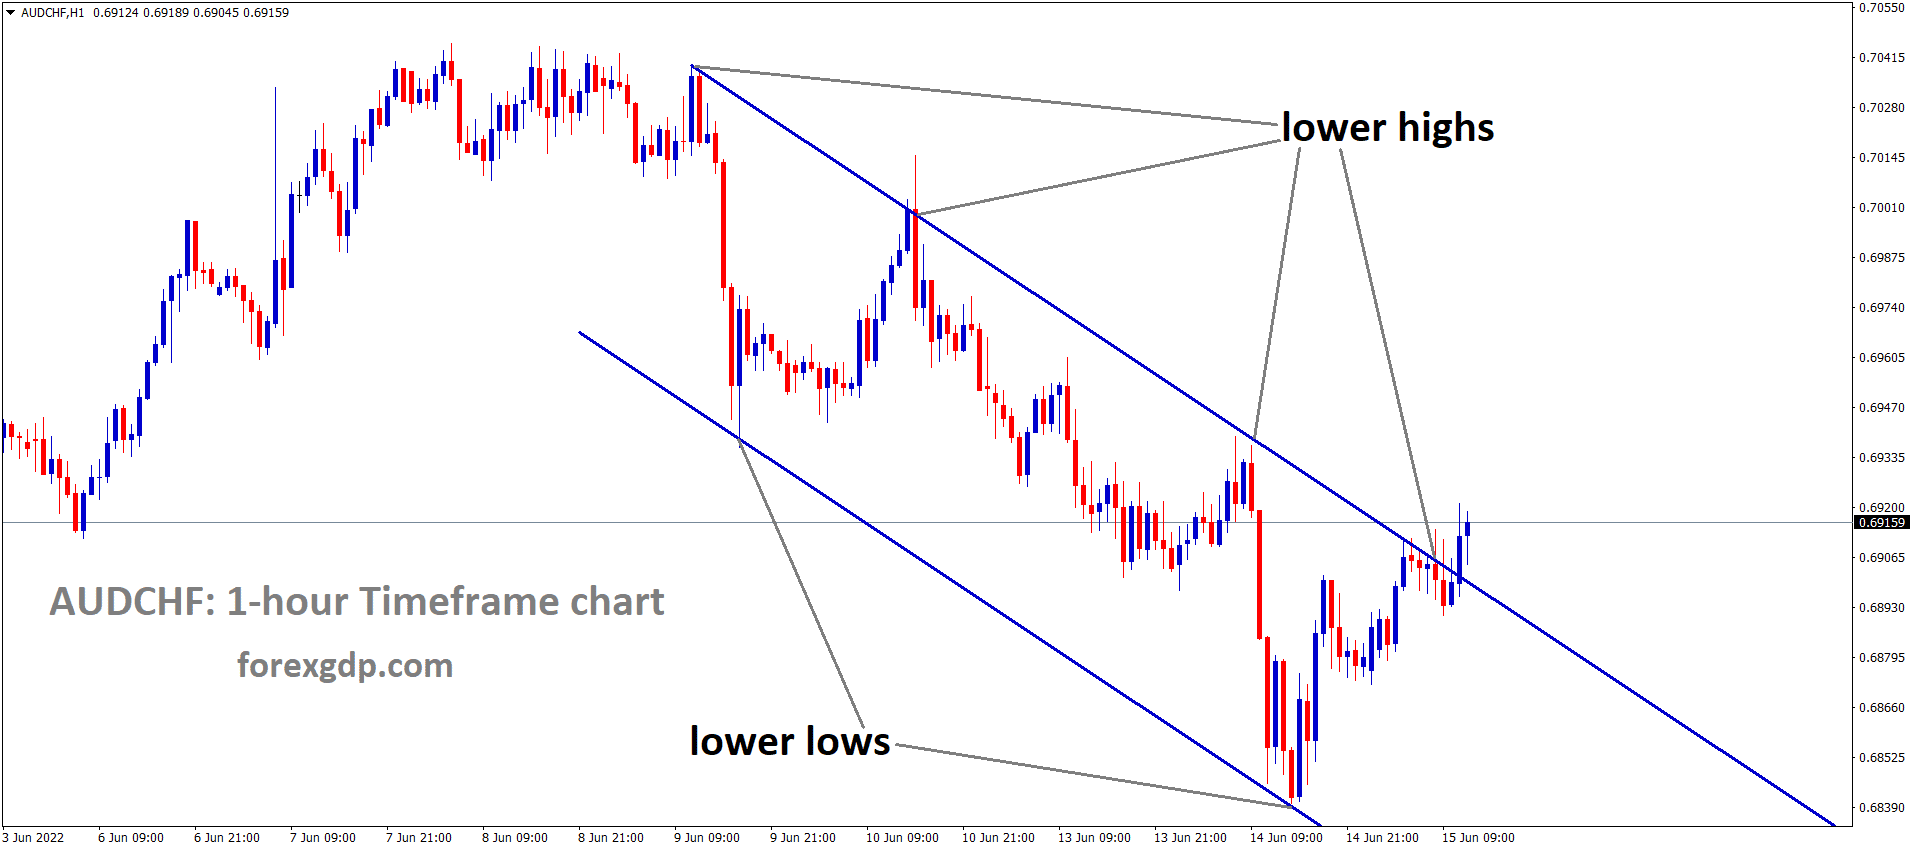 AUDCHF is moving in the Descending channel and the Market has reached the Lower high area of the channel